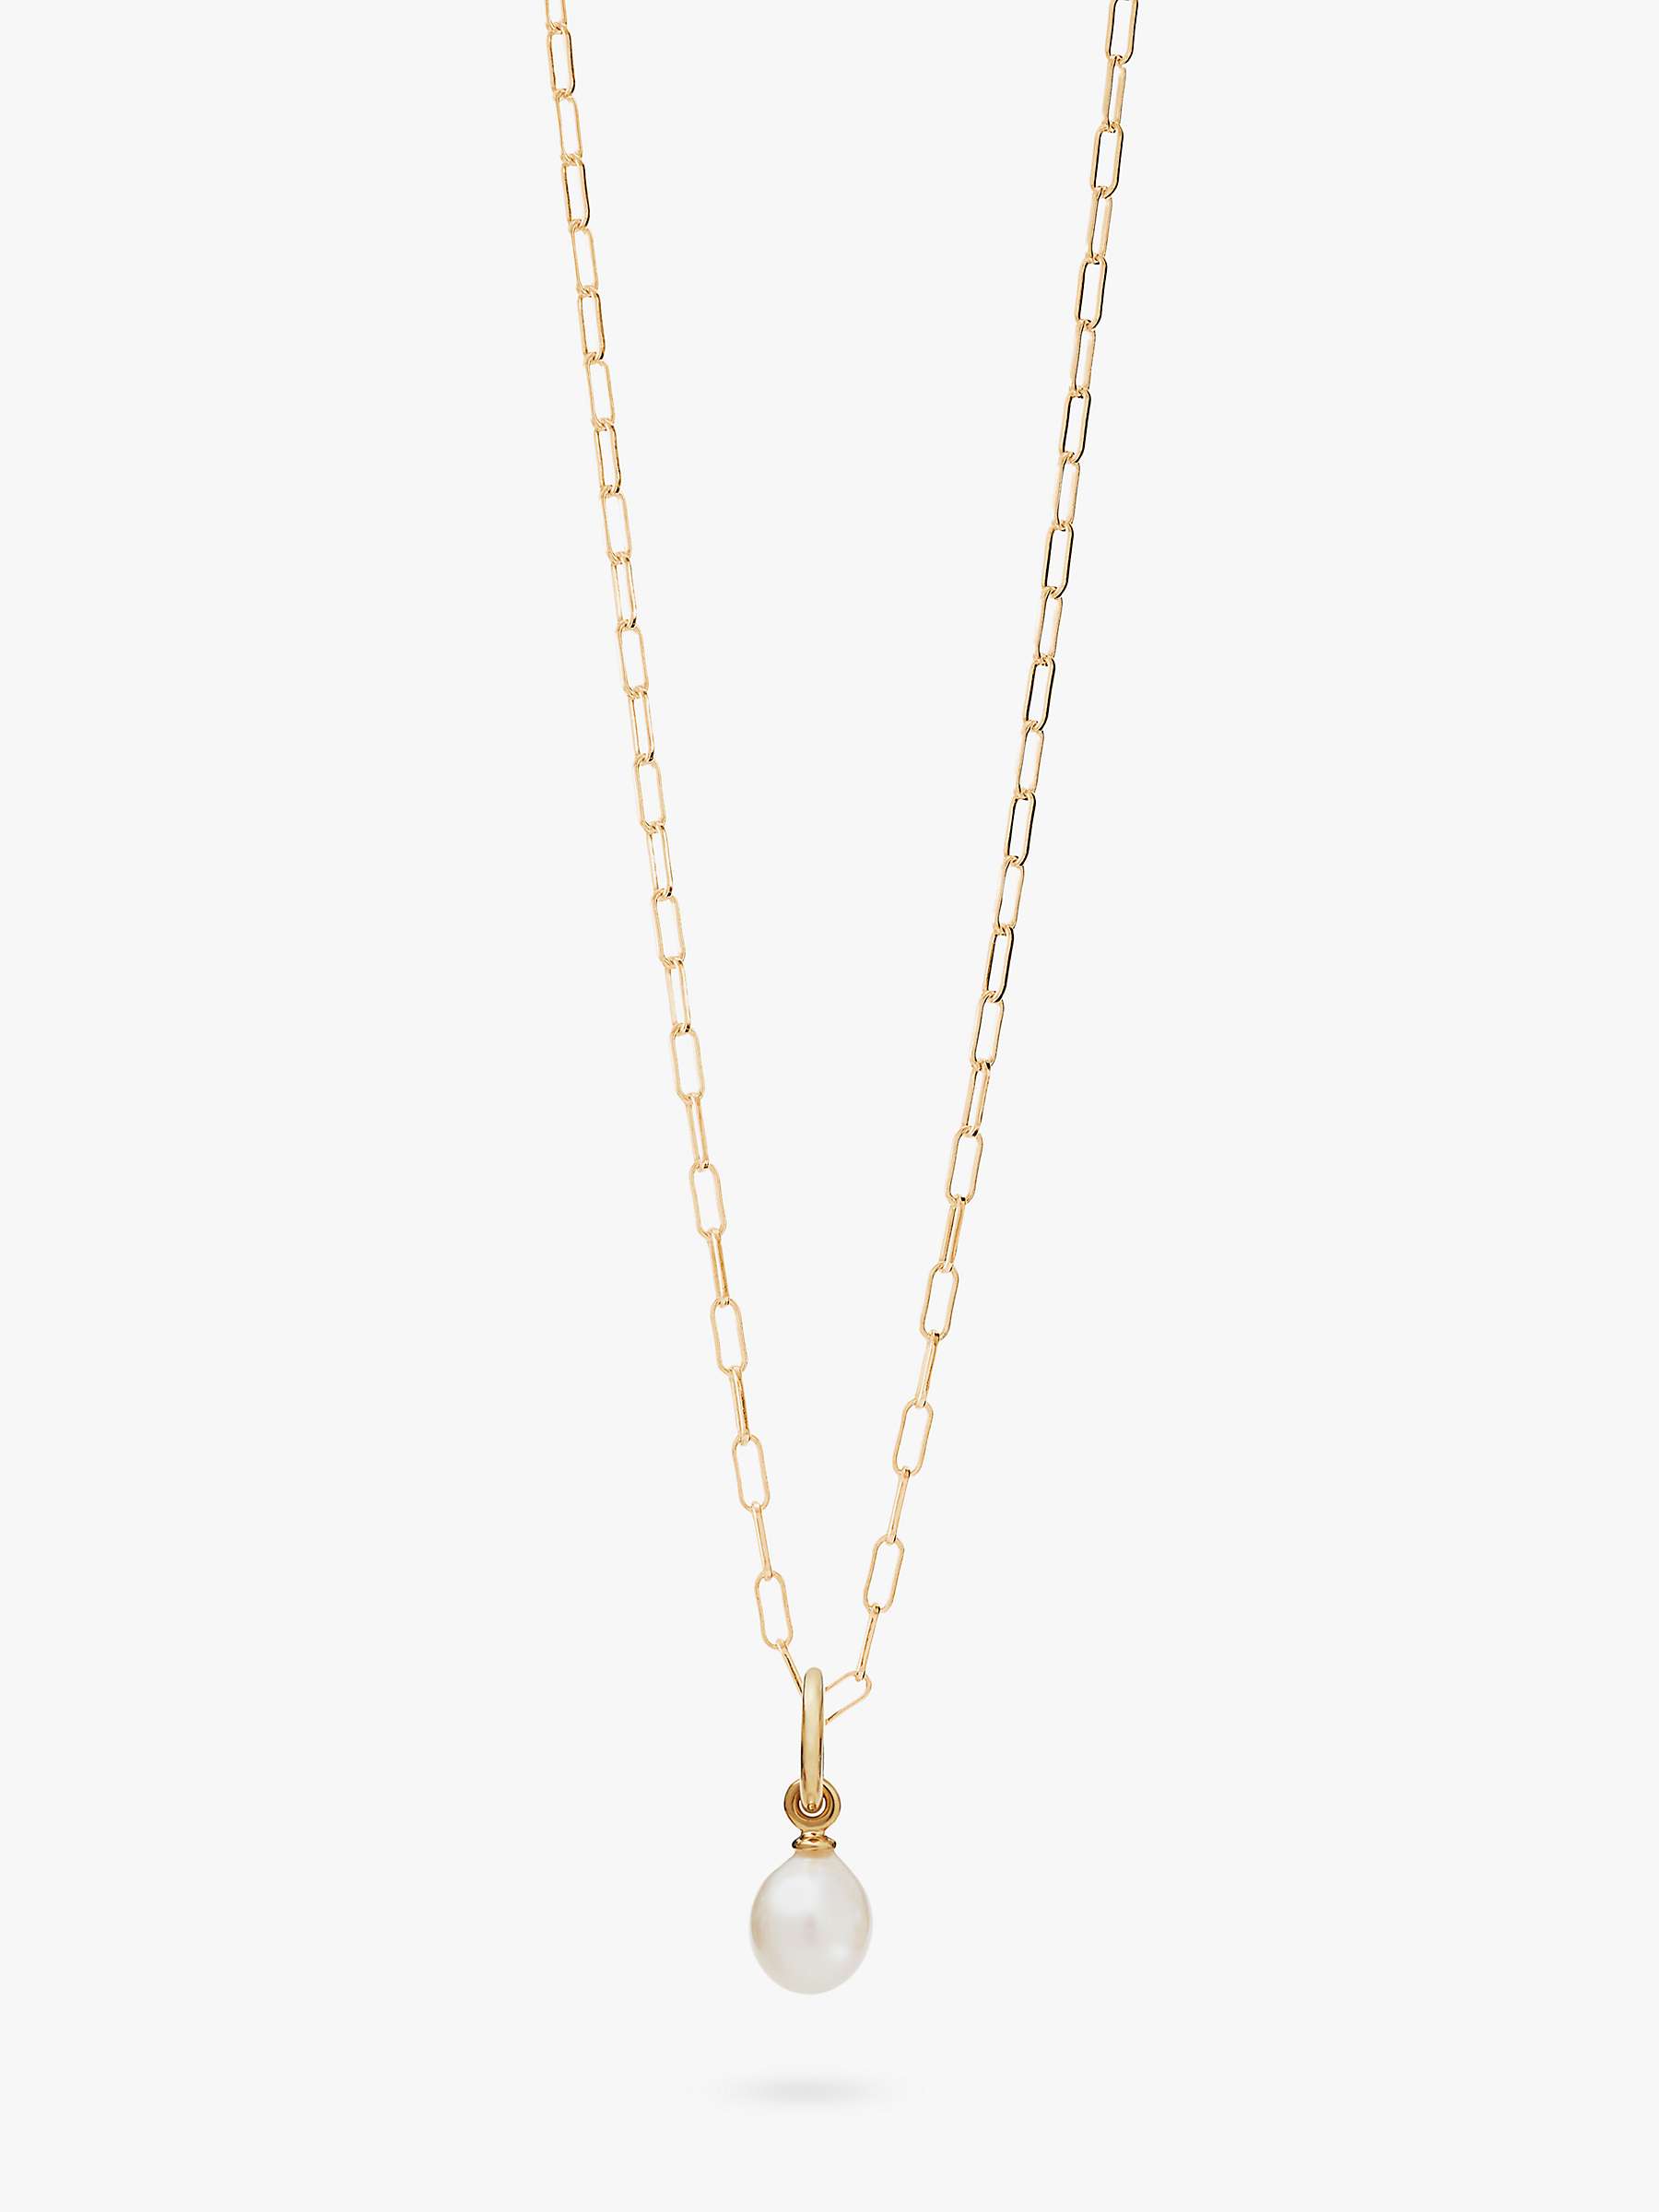 Buy Recognised Freedom Pearl Paperlink Chain Pendant Necklace, Gold Online at johnlewis.com